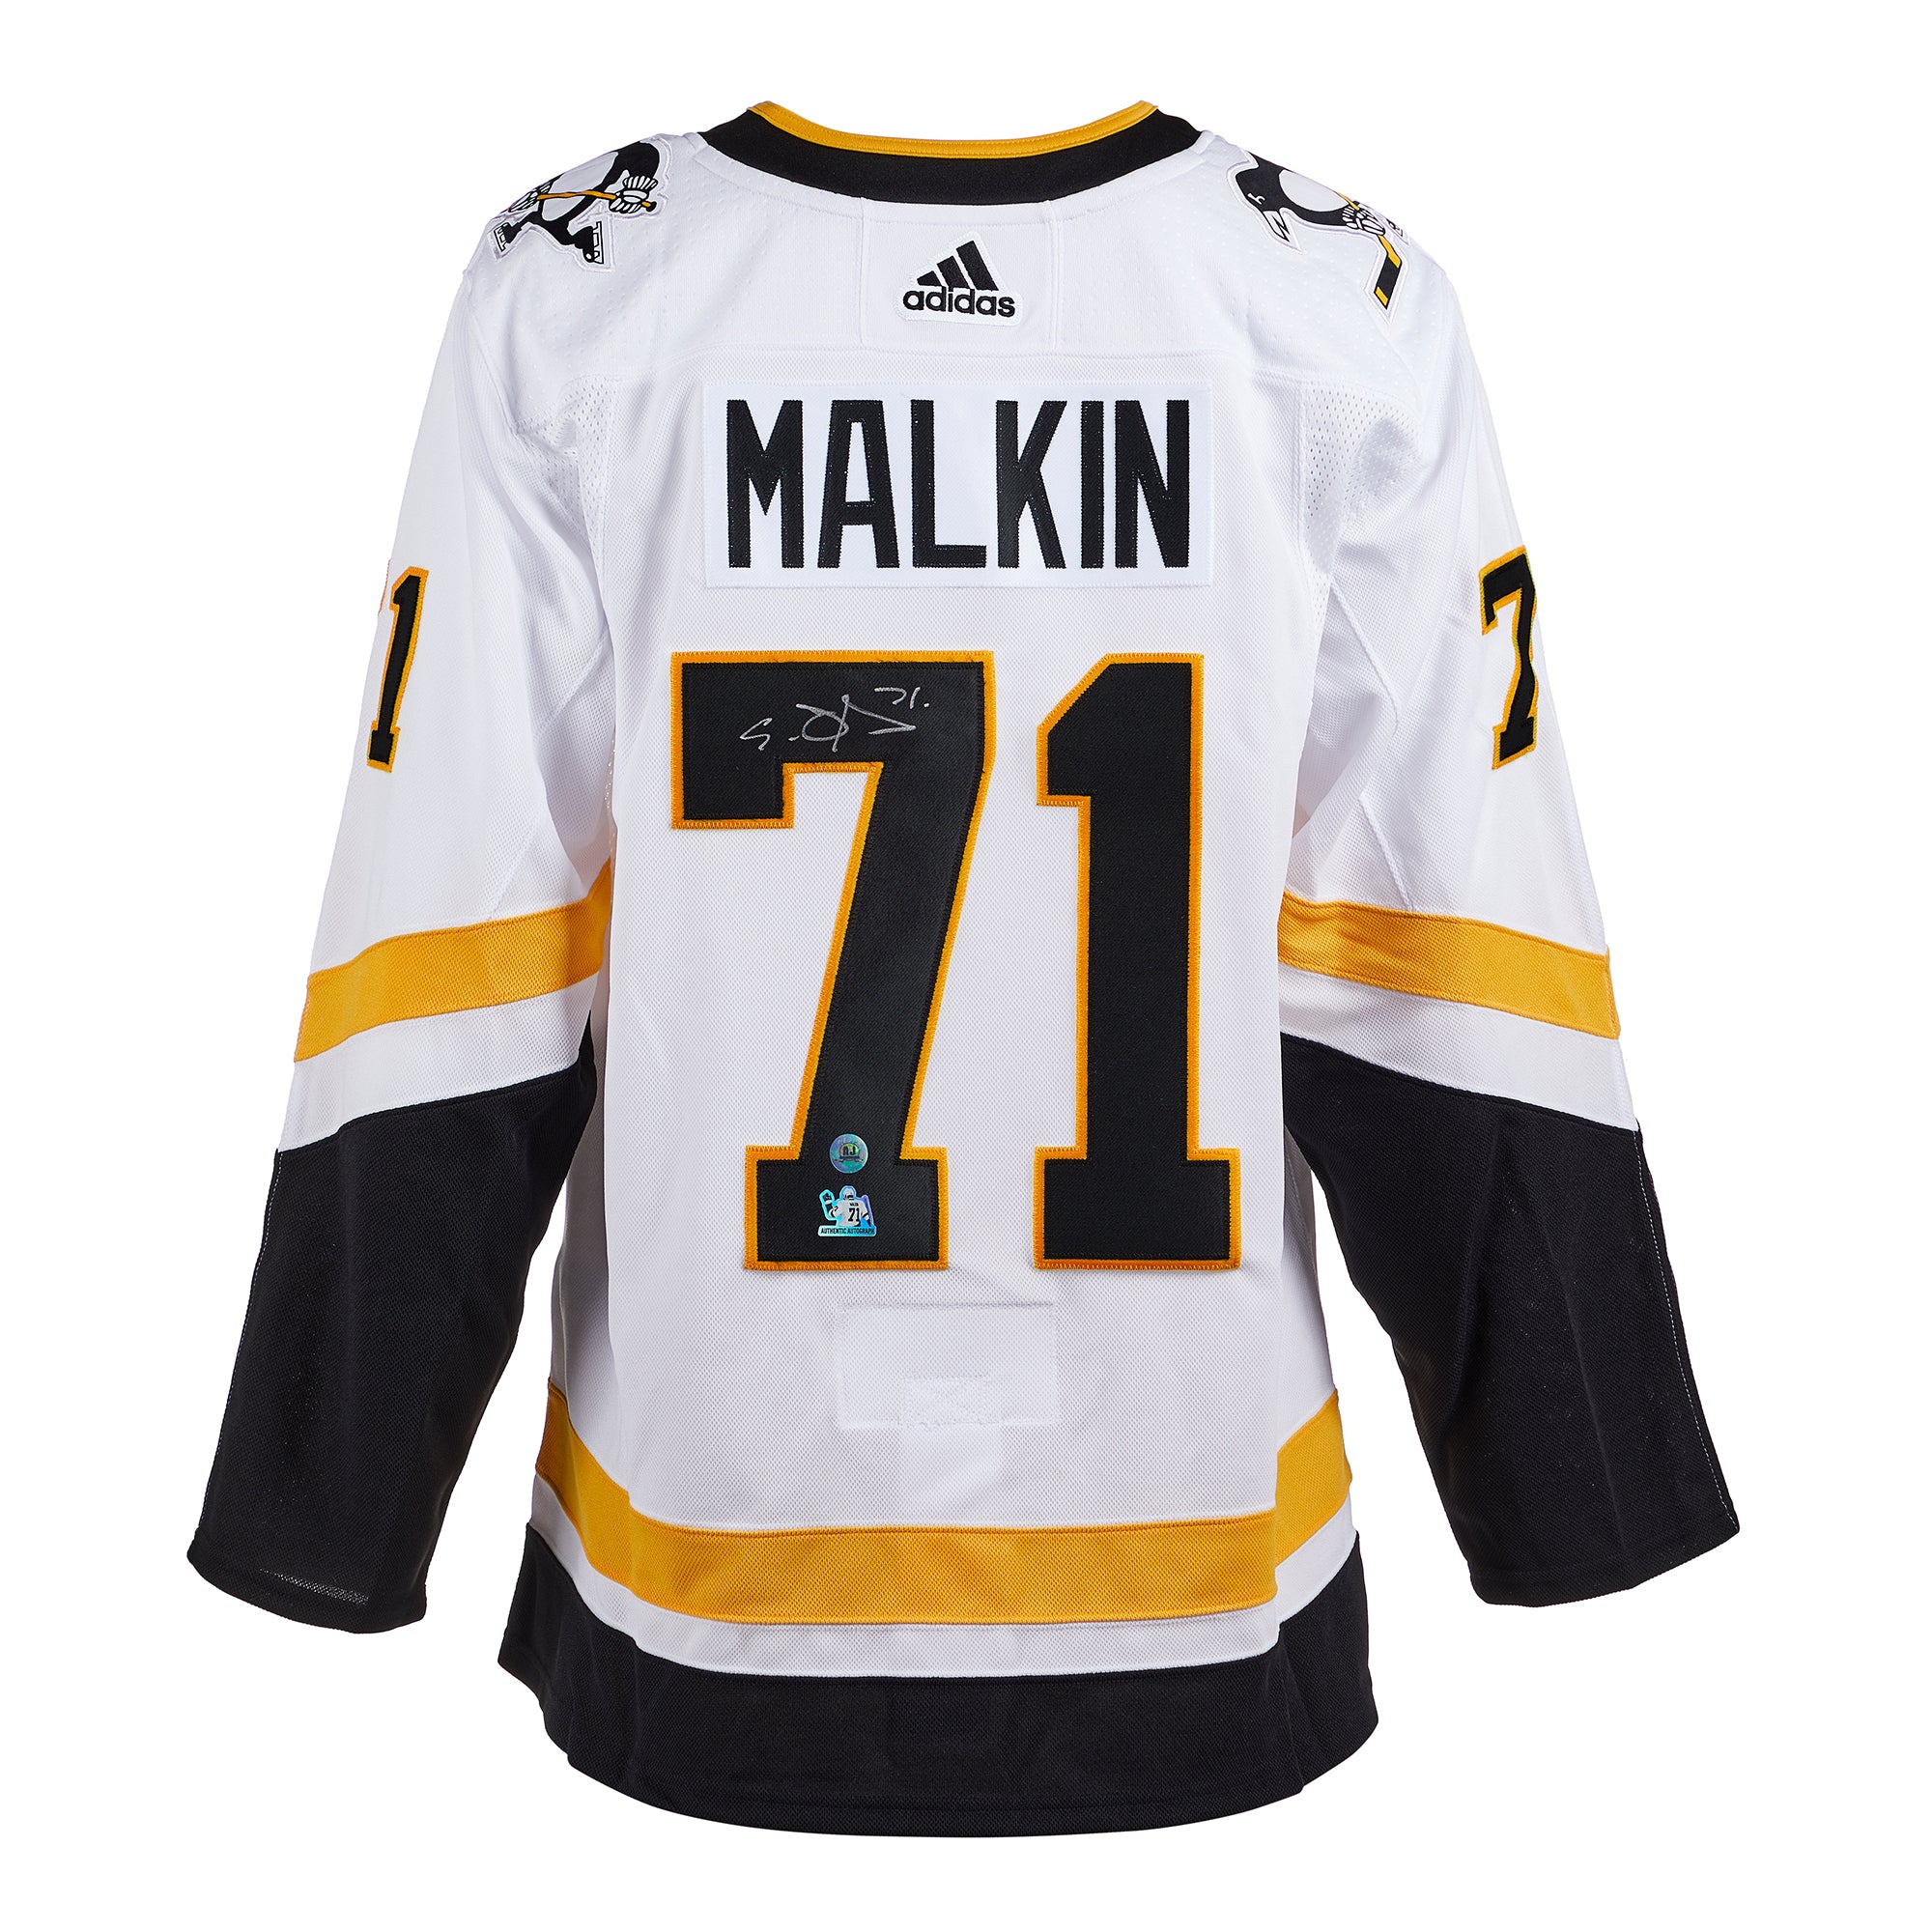 Evgeni Malkin Pittsburgh Penguins Adidas Pro Autographed Jersey -  Autographed NHL Jerseys at 's Sports Collectibles Store